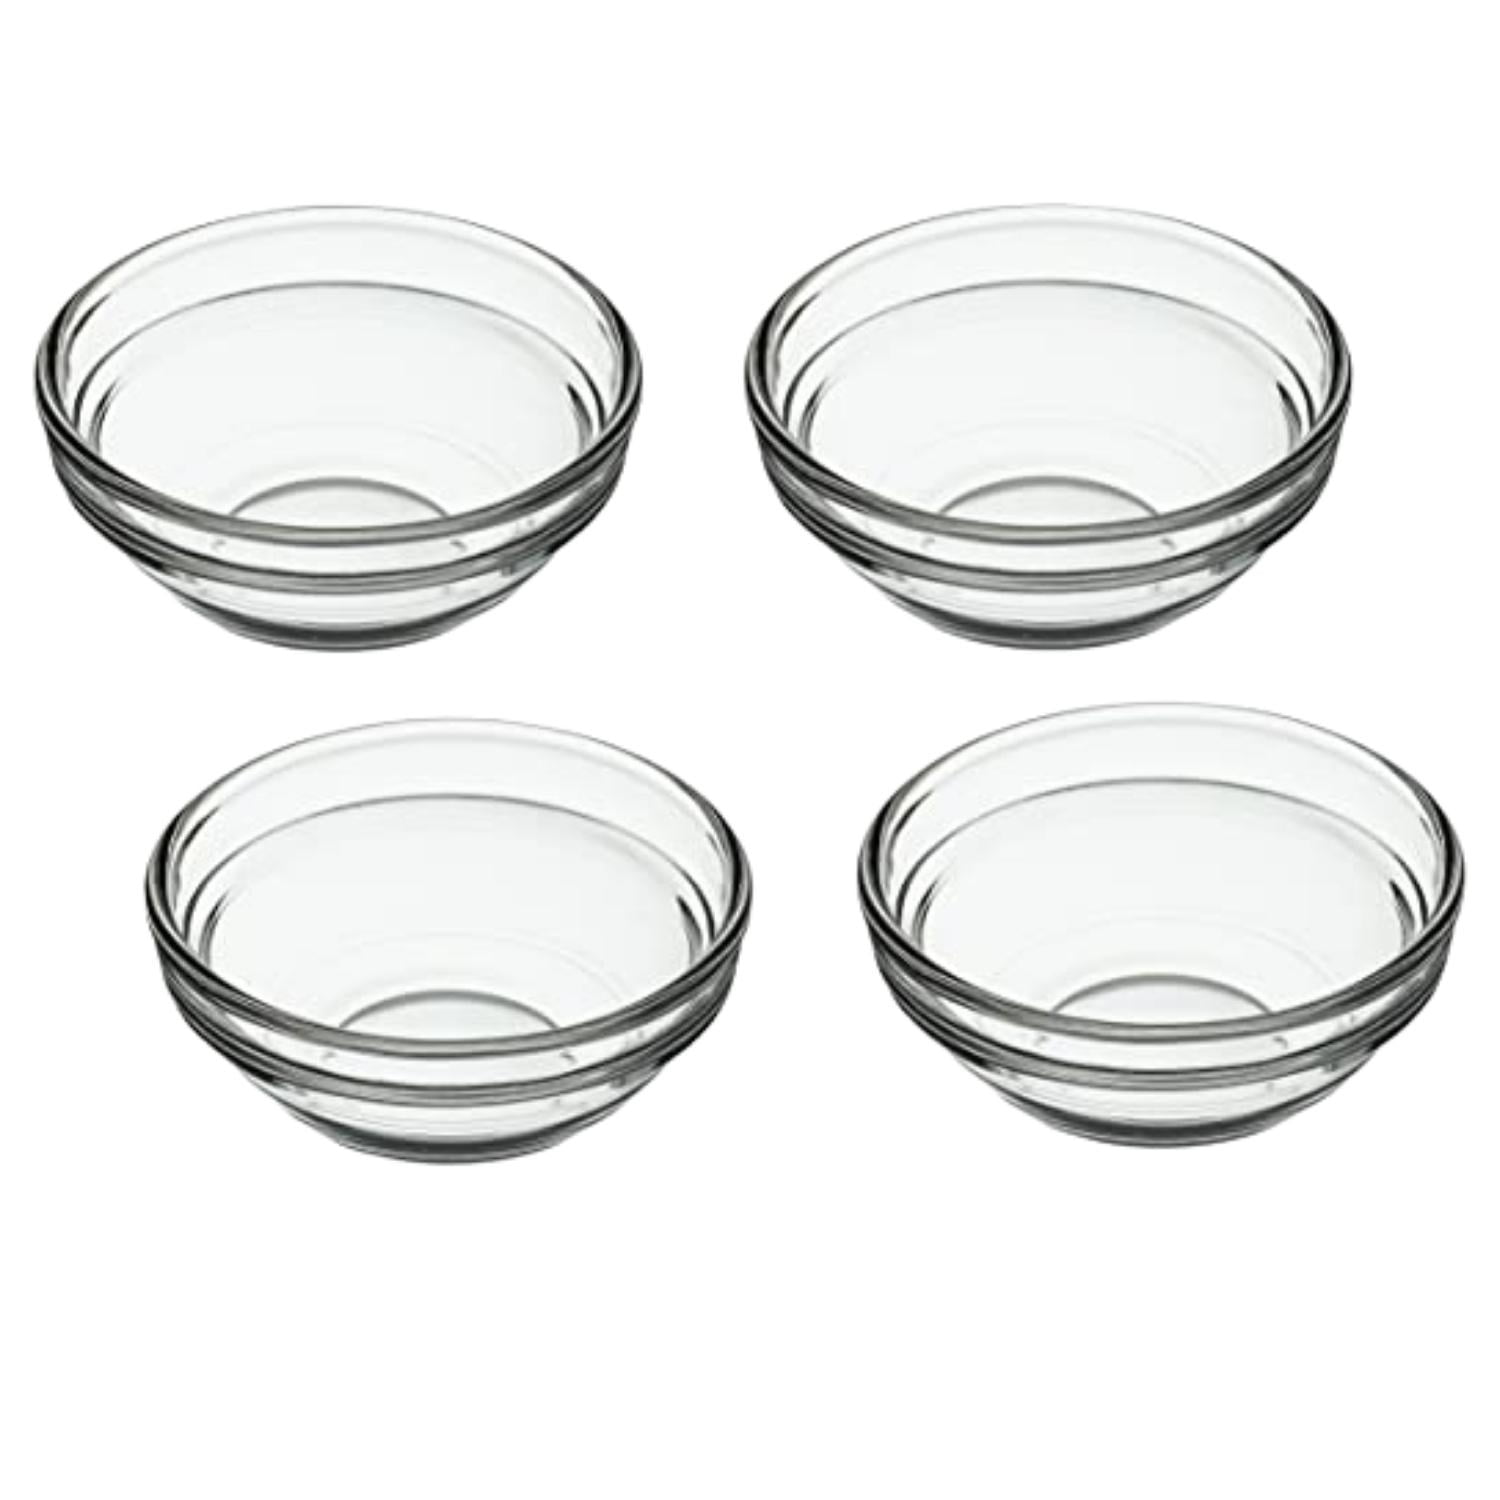 SZUAH 3.5 inch Small Glass Bowls 12 Pack Prep Bowls Serving Bowls 4.5 oz Microwavable Stackable Clear Glass Bowls for Kitchen, Dessert, Dips, Nut